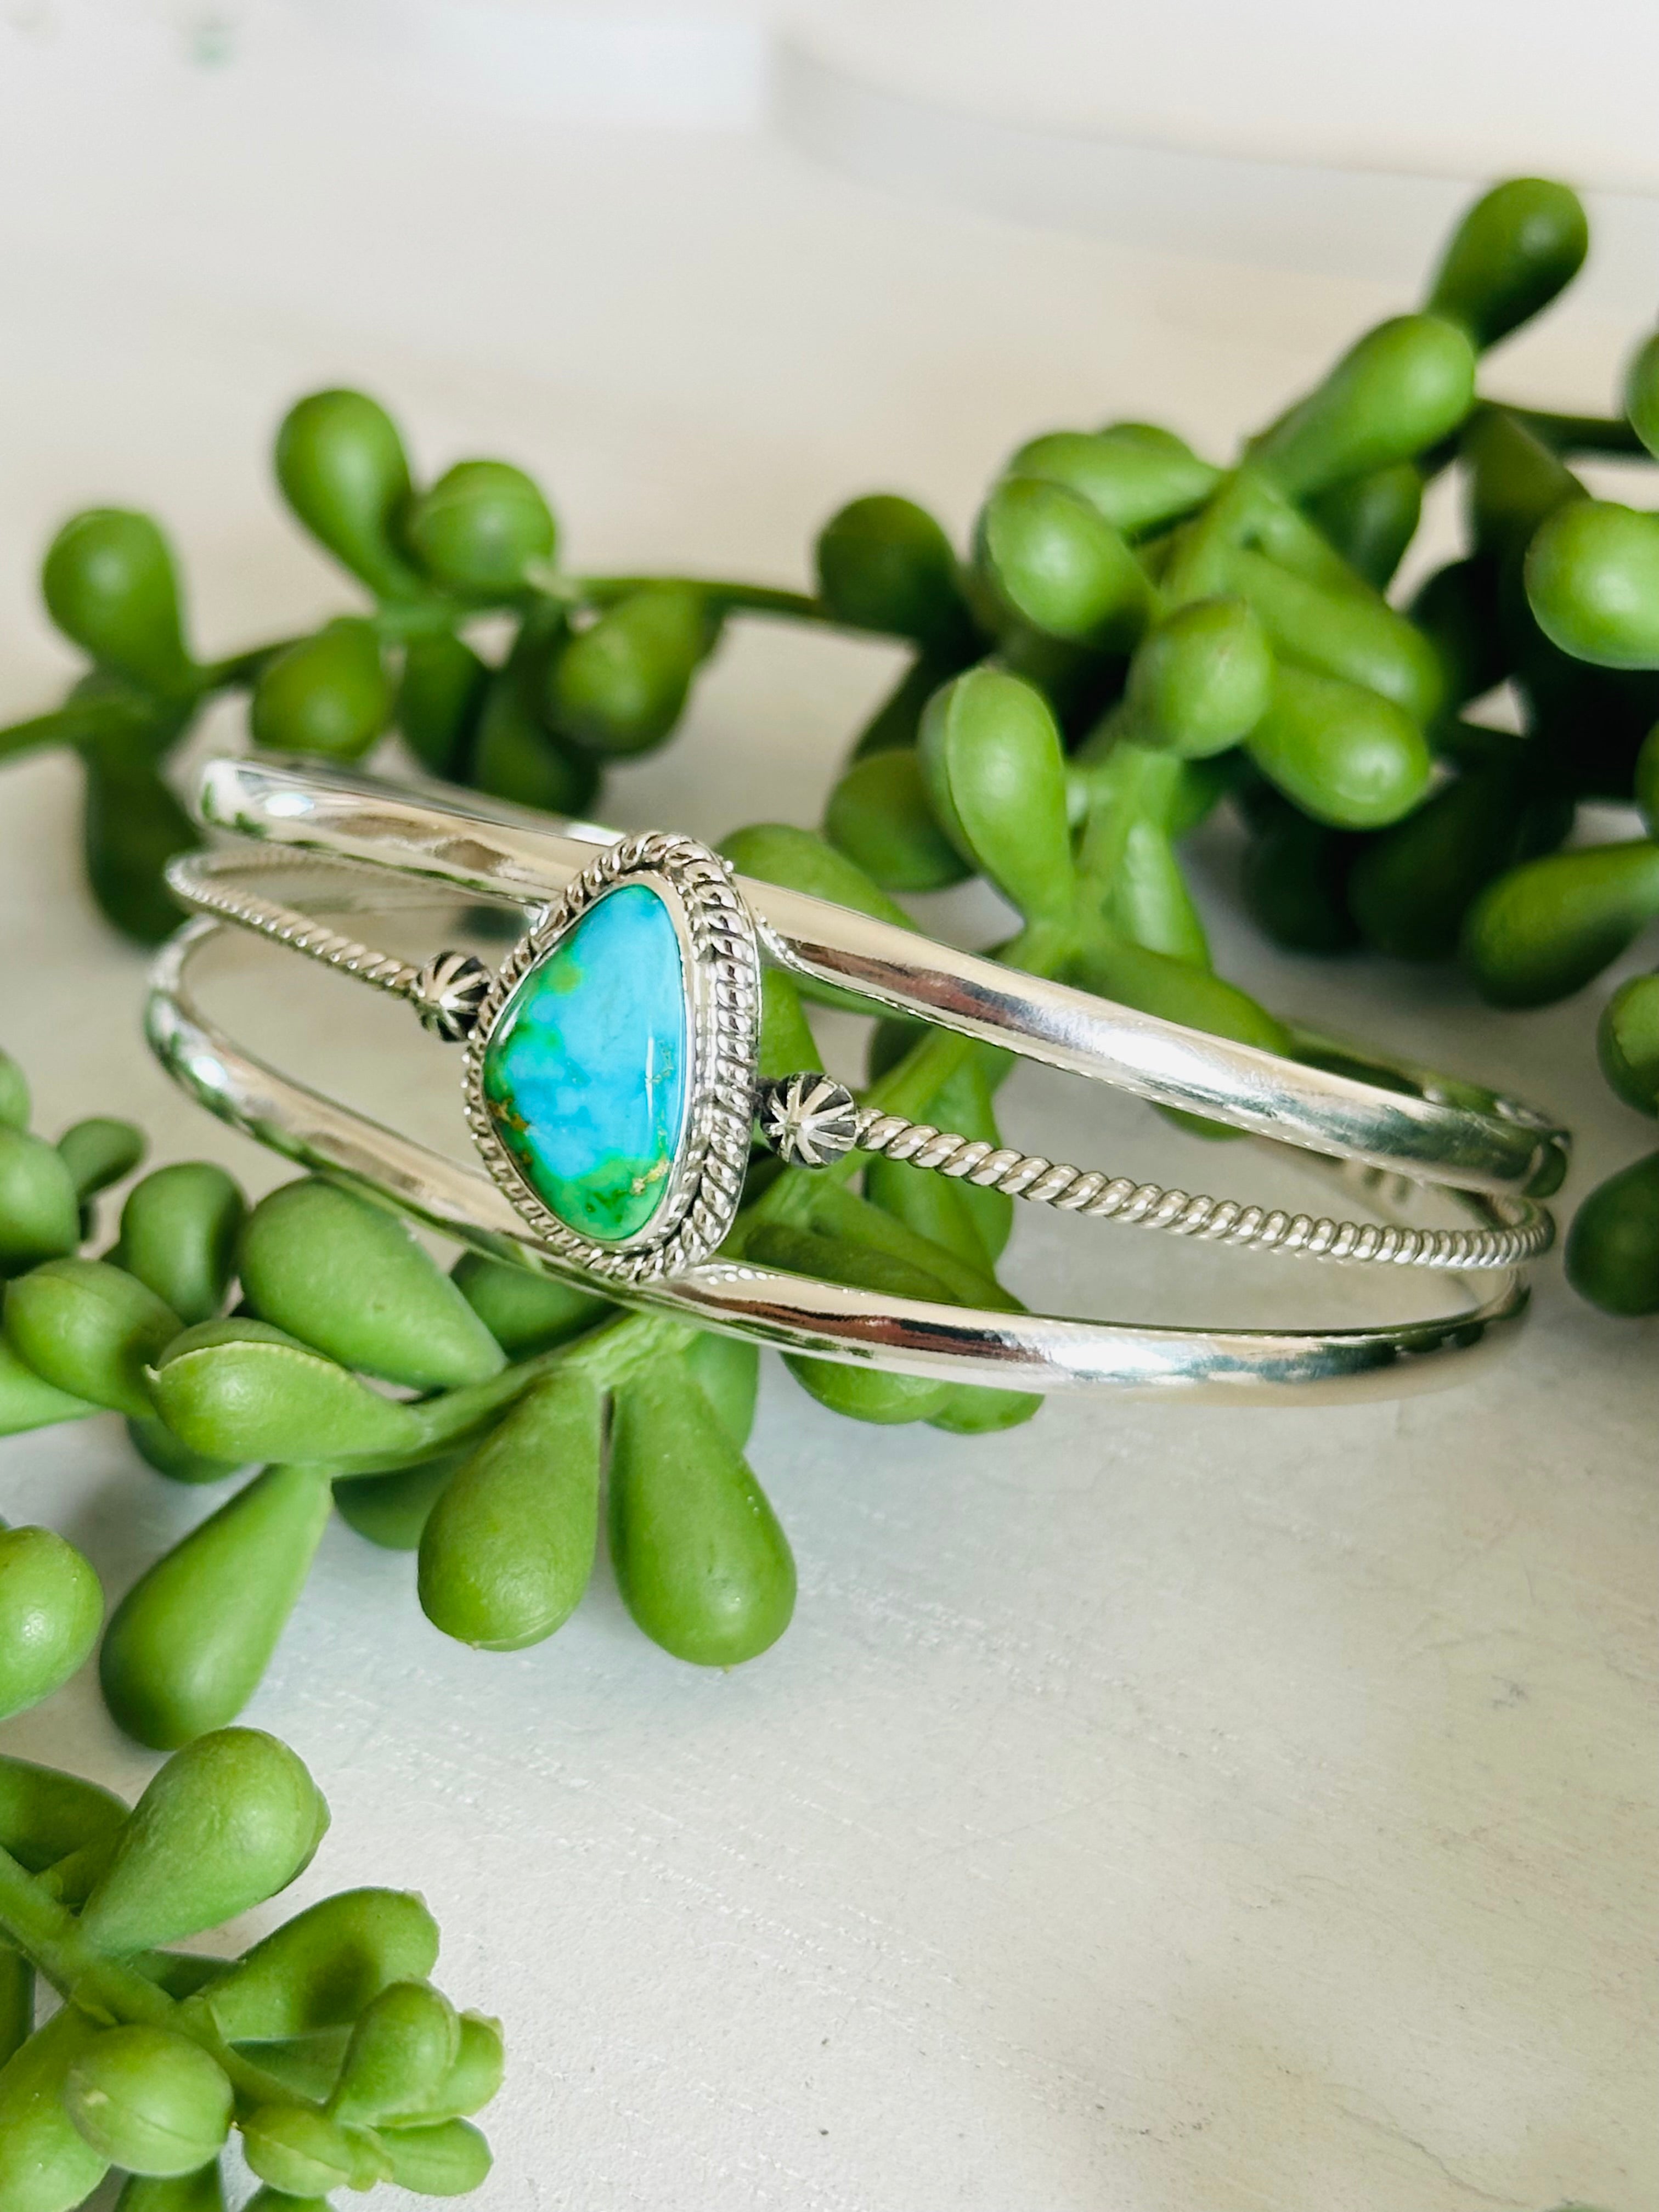 Southwest Made Sonoran Gold Turquoise & Sterling Silver Cuff Bracelet